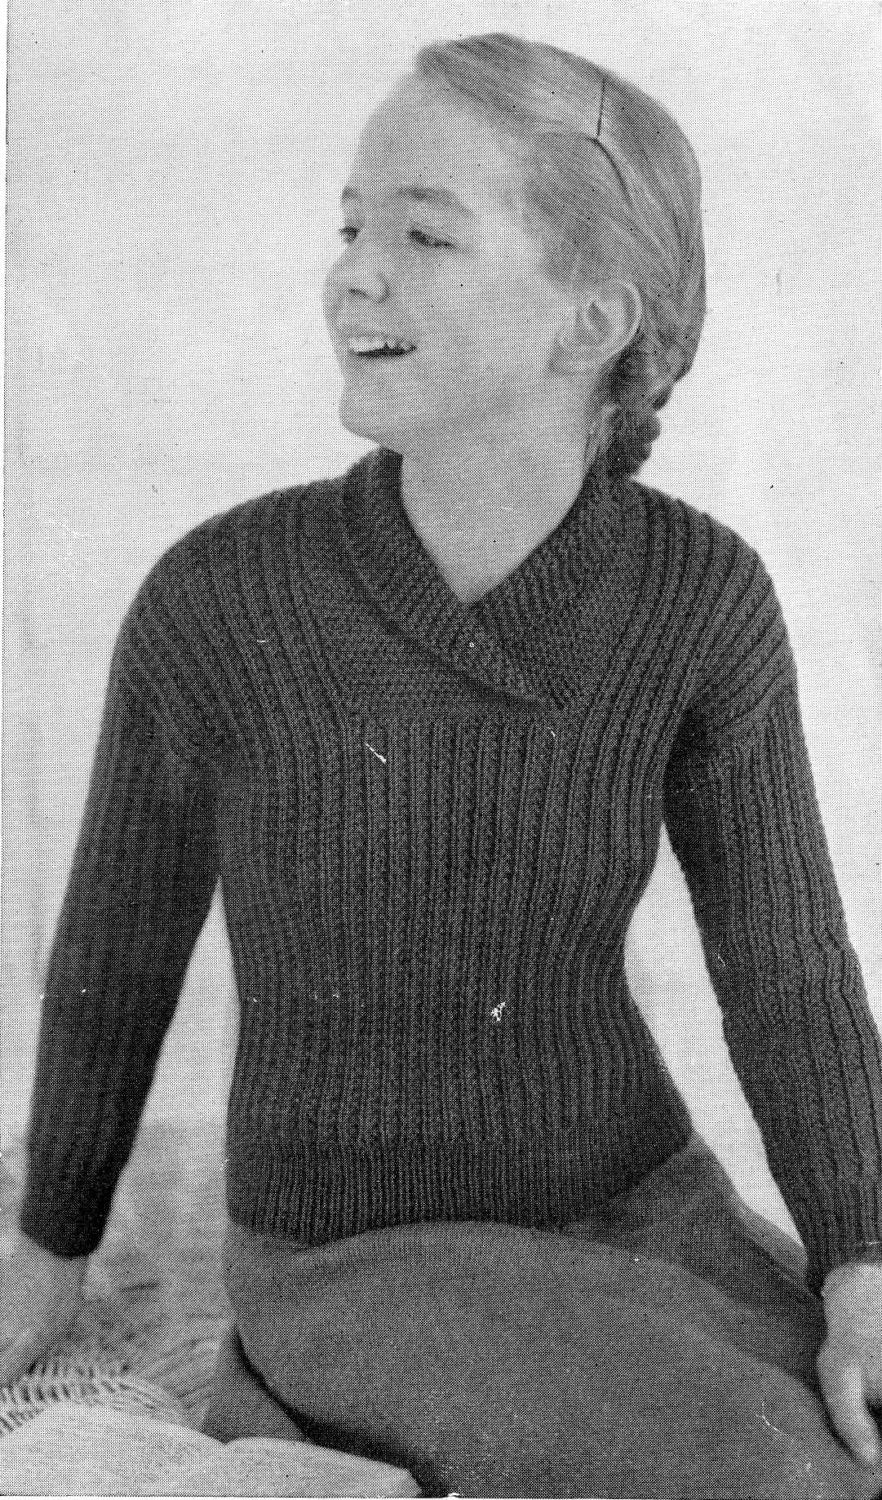 Girls 2 Styles of Cardigan and a Jumper, 28"-34" Chest, DK, 50s Knitting Pattern, P&B 428